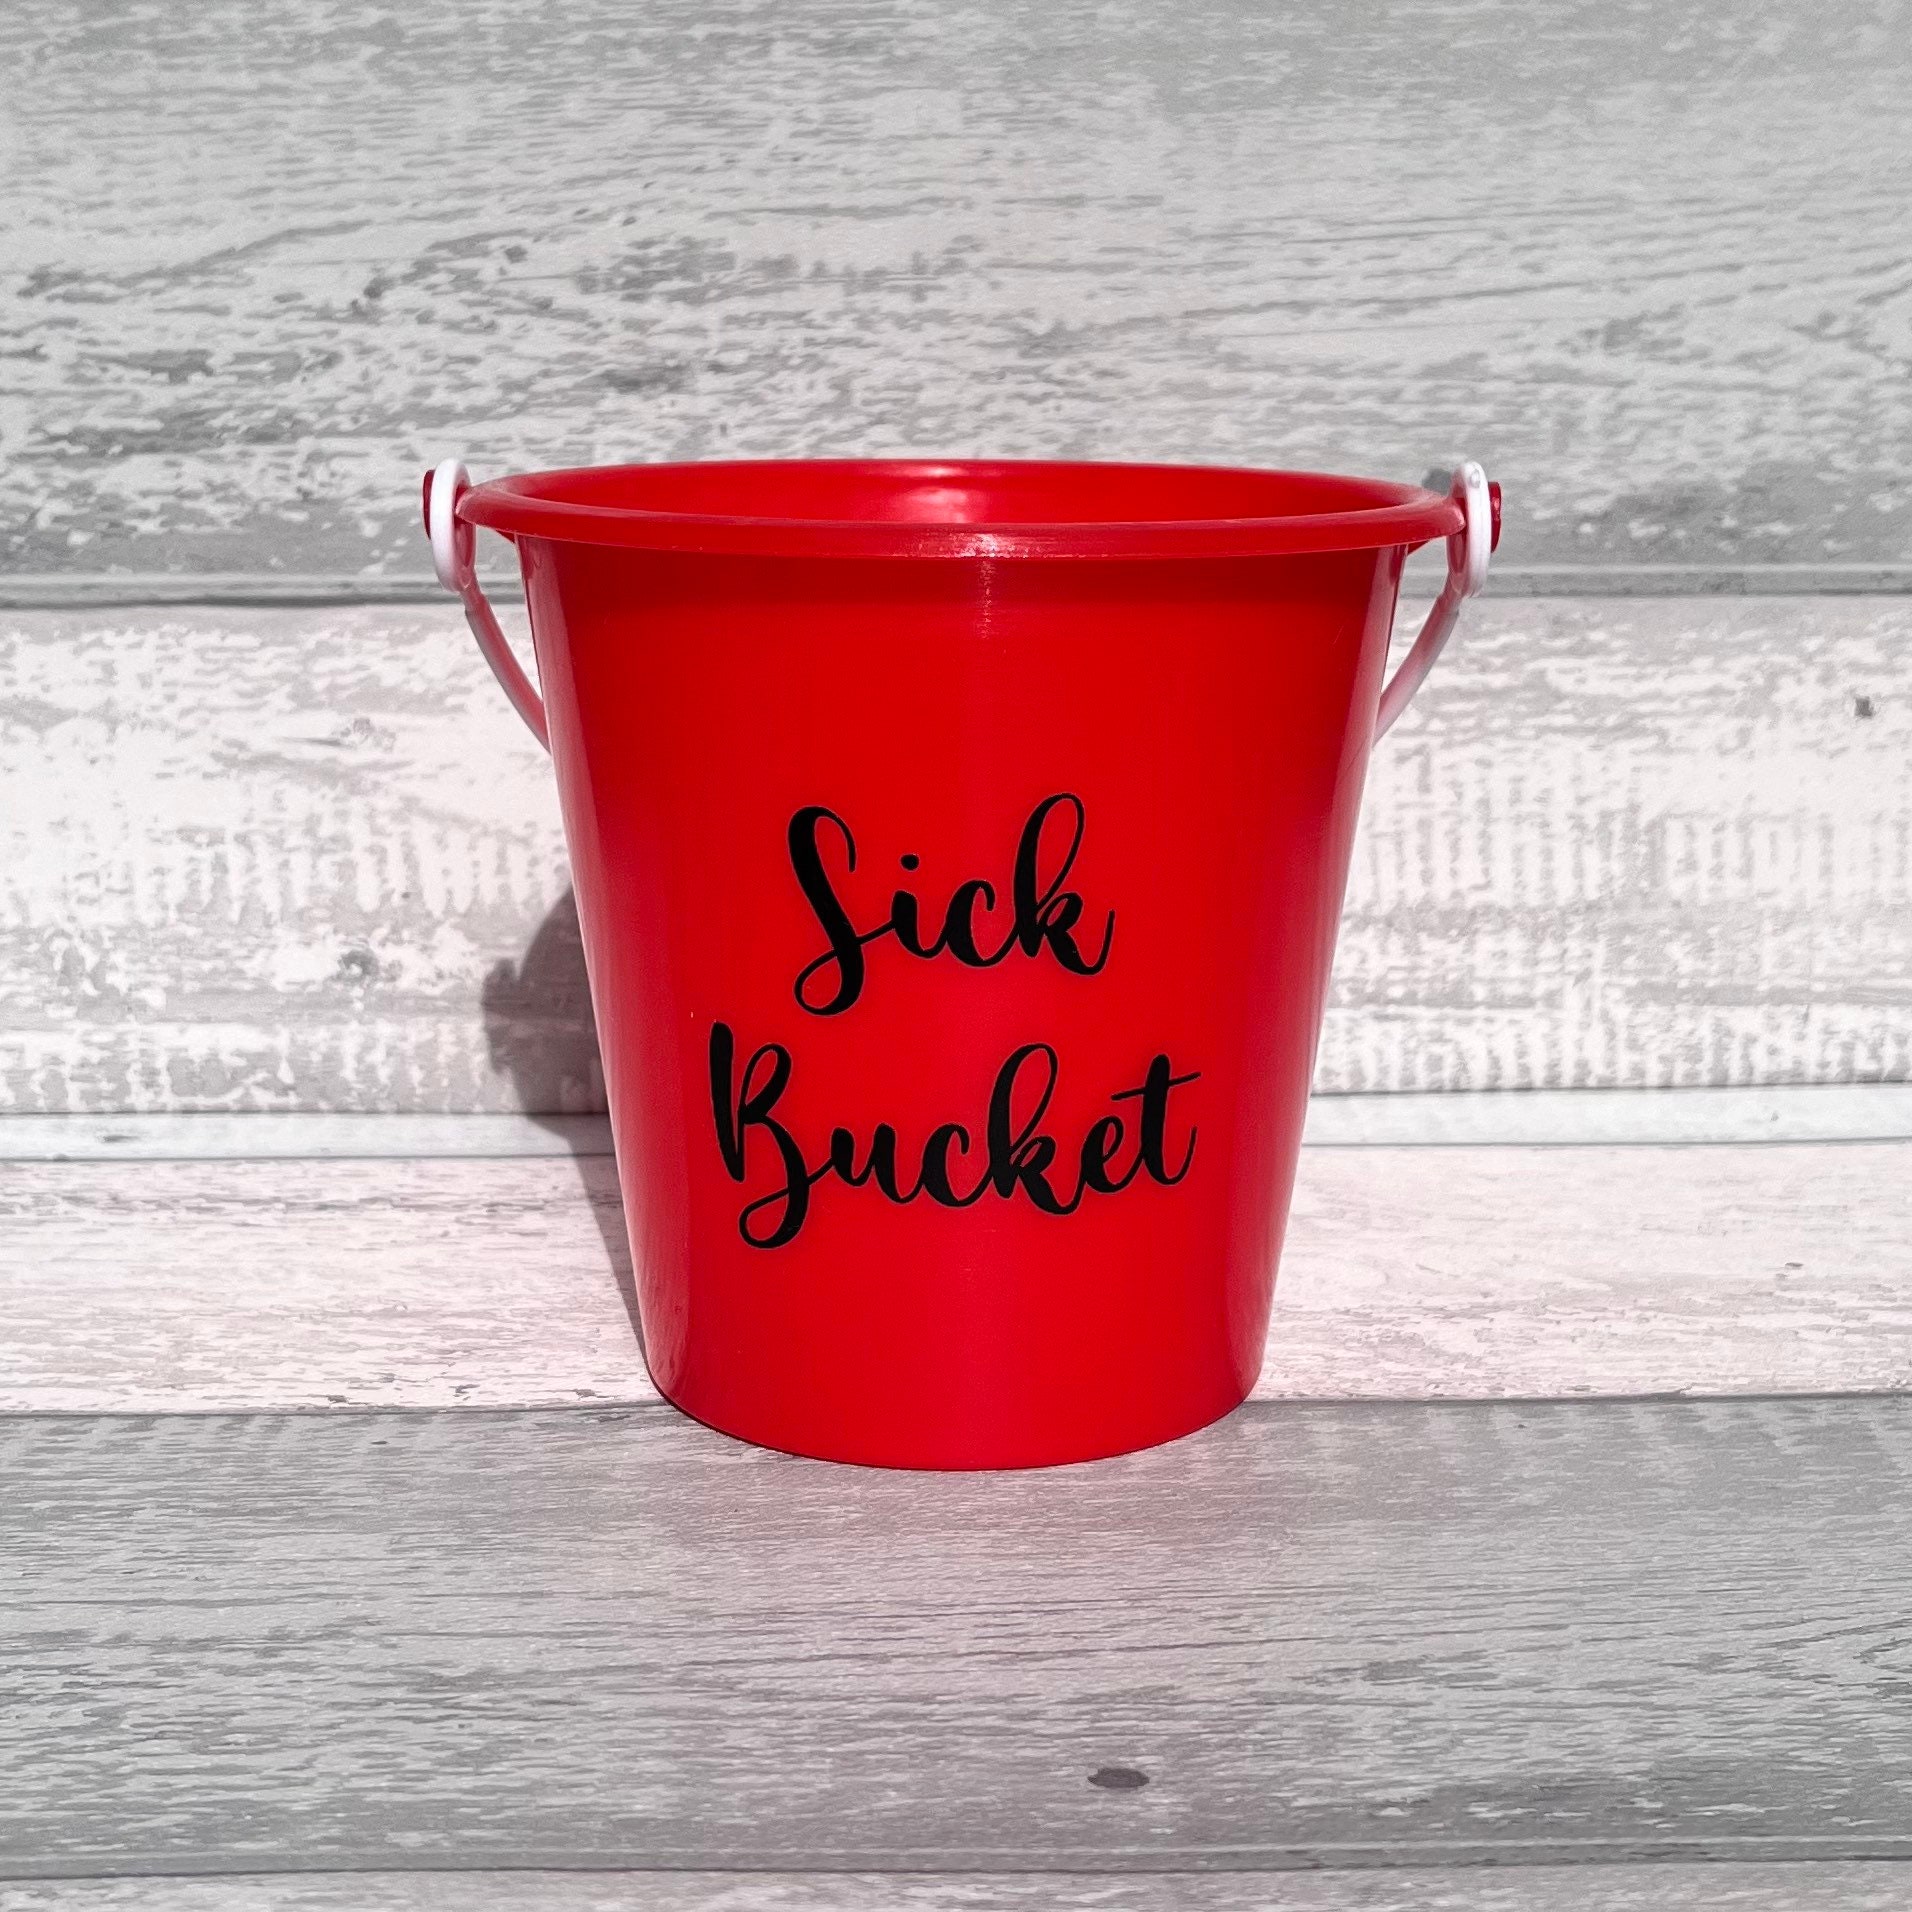 Sick Bucket With how To Black Text 